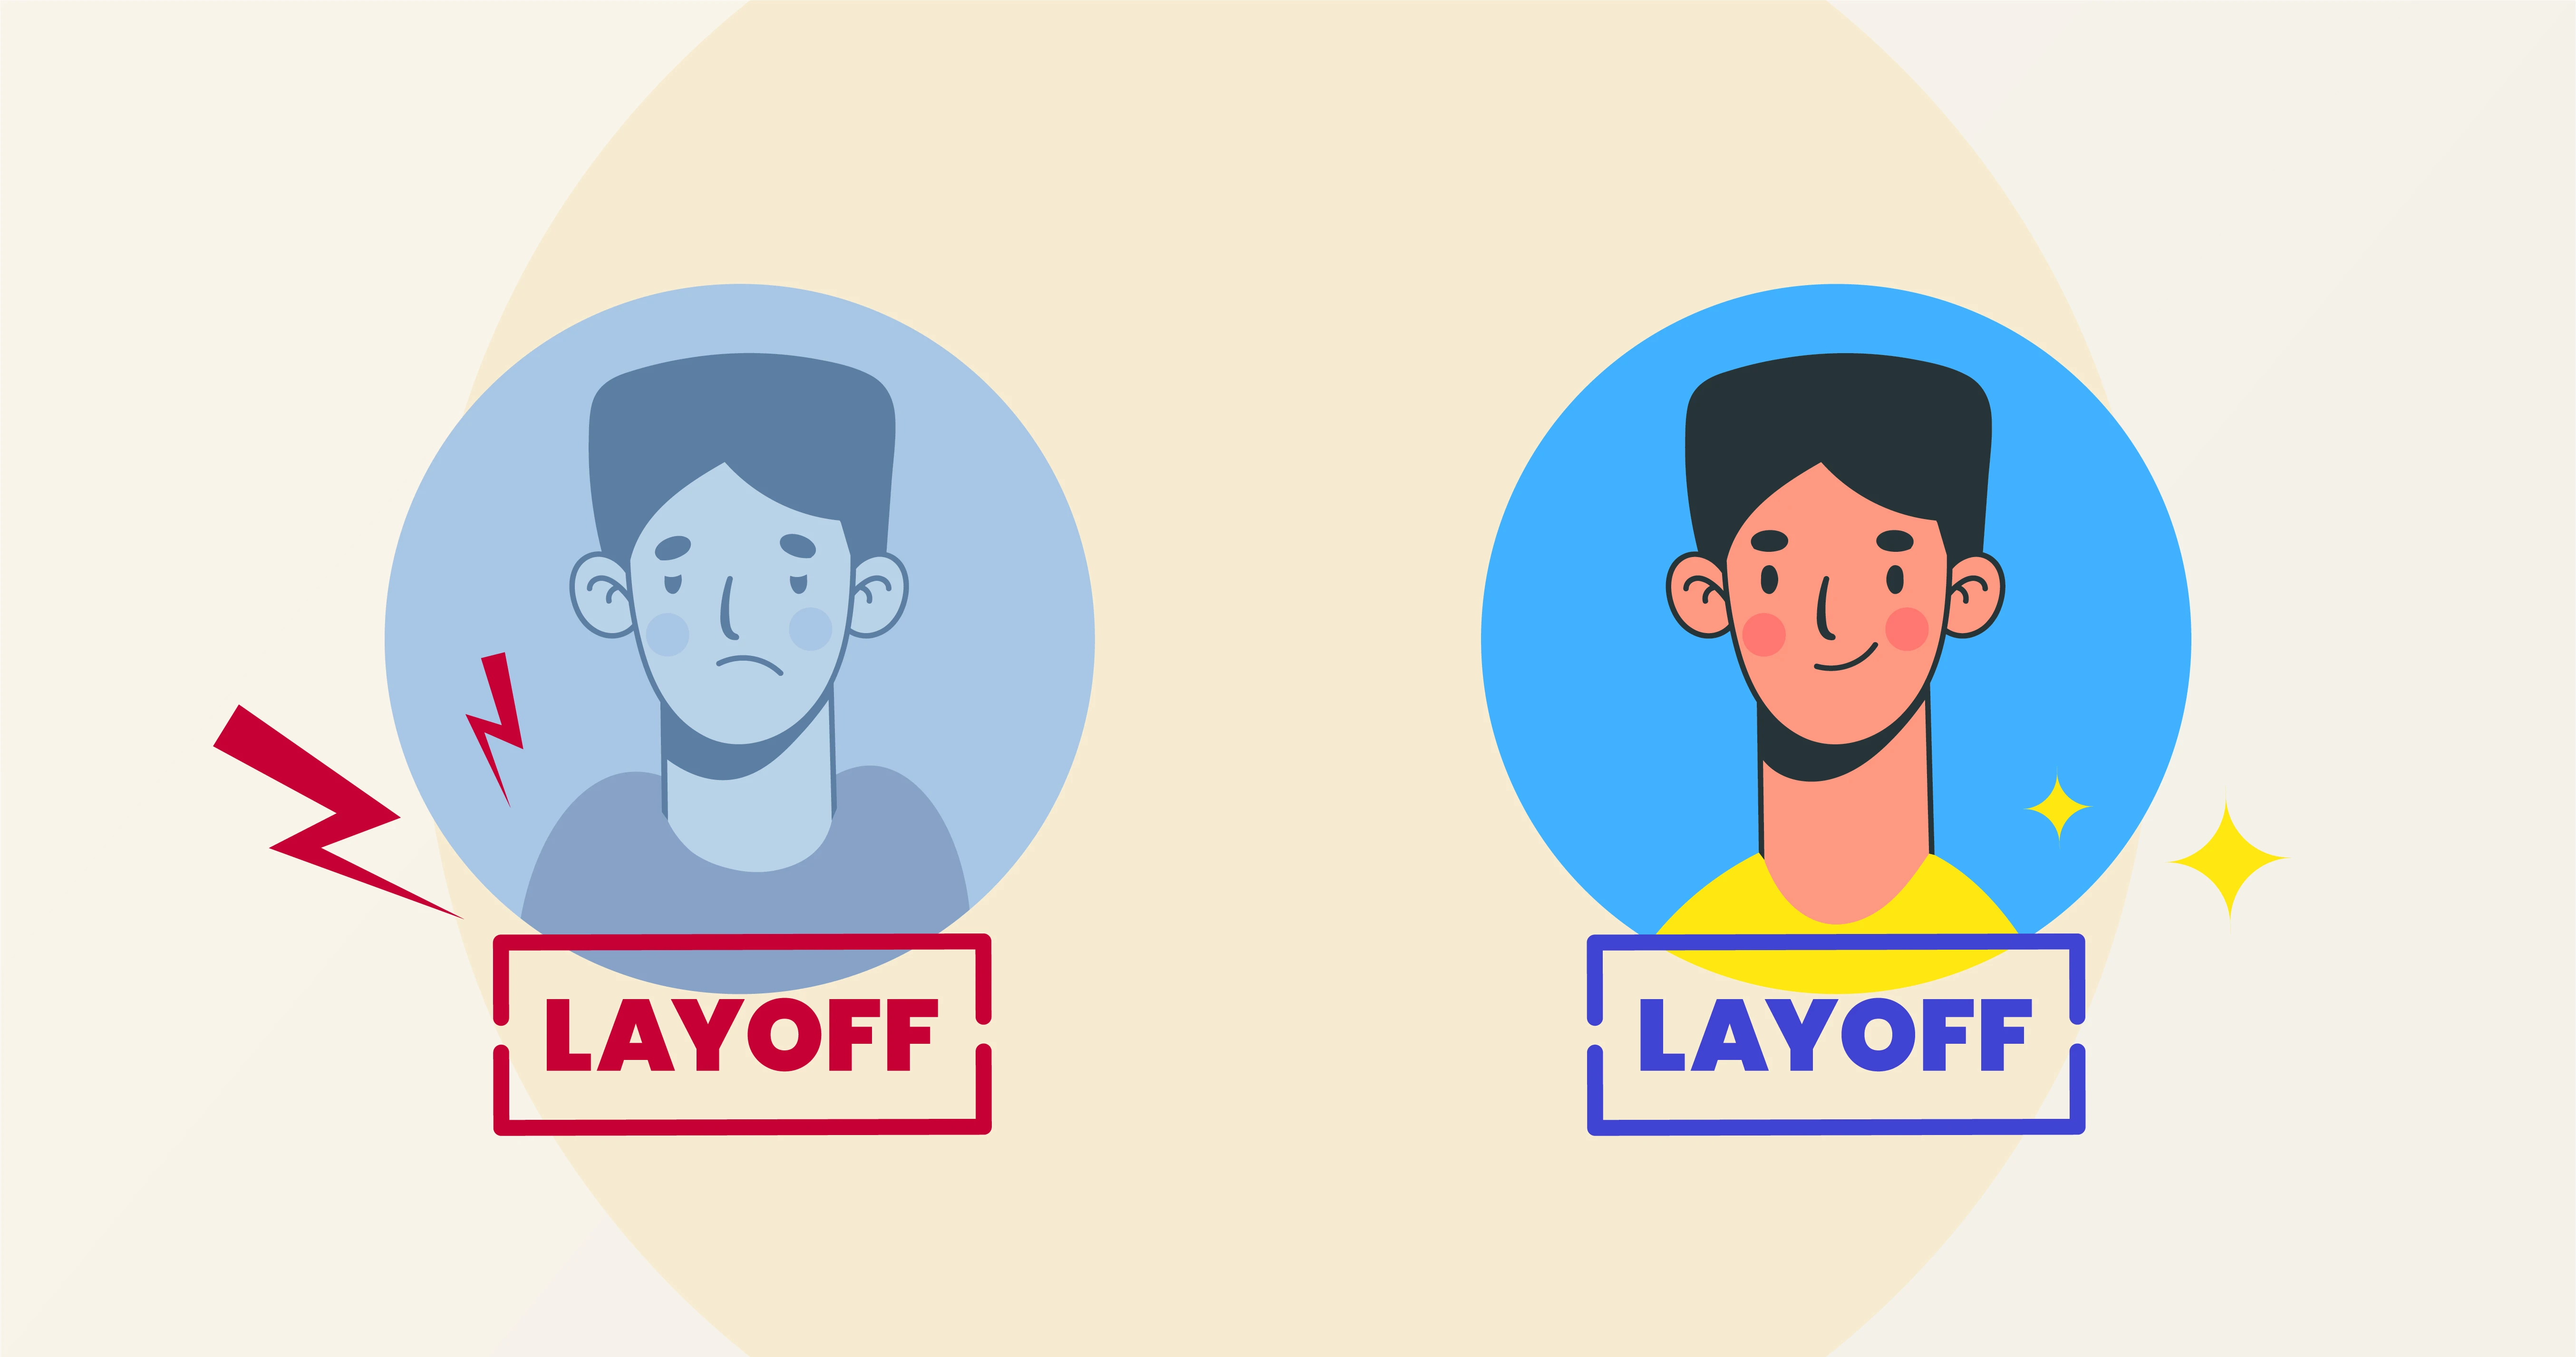 How To Plan a Layoff With Care